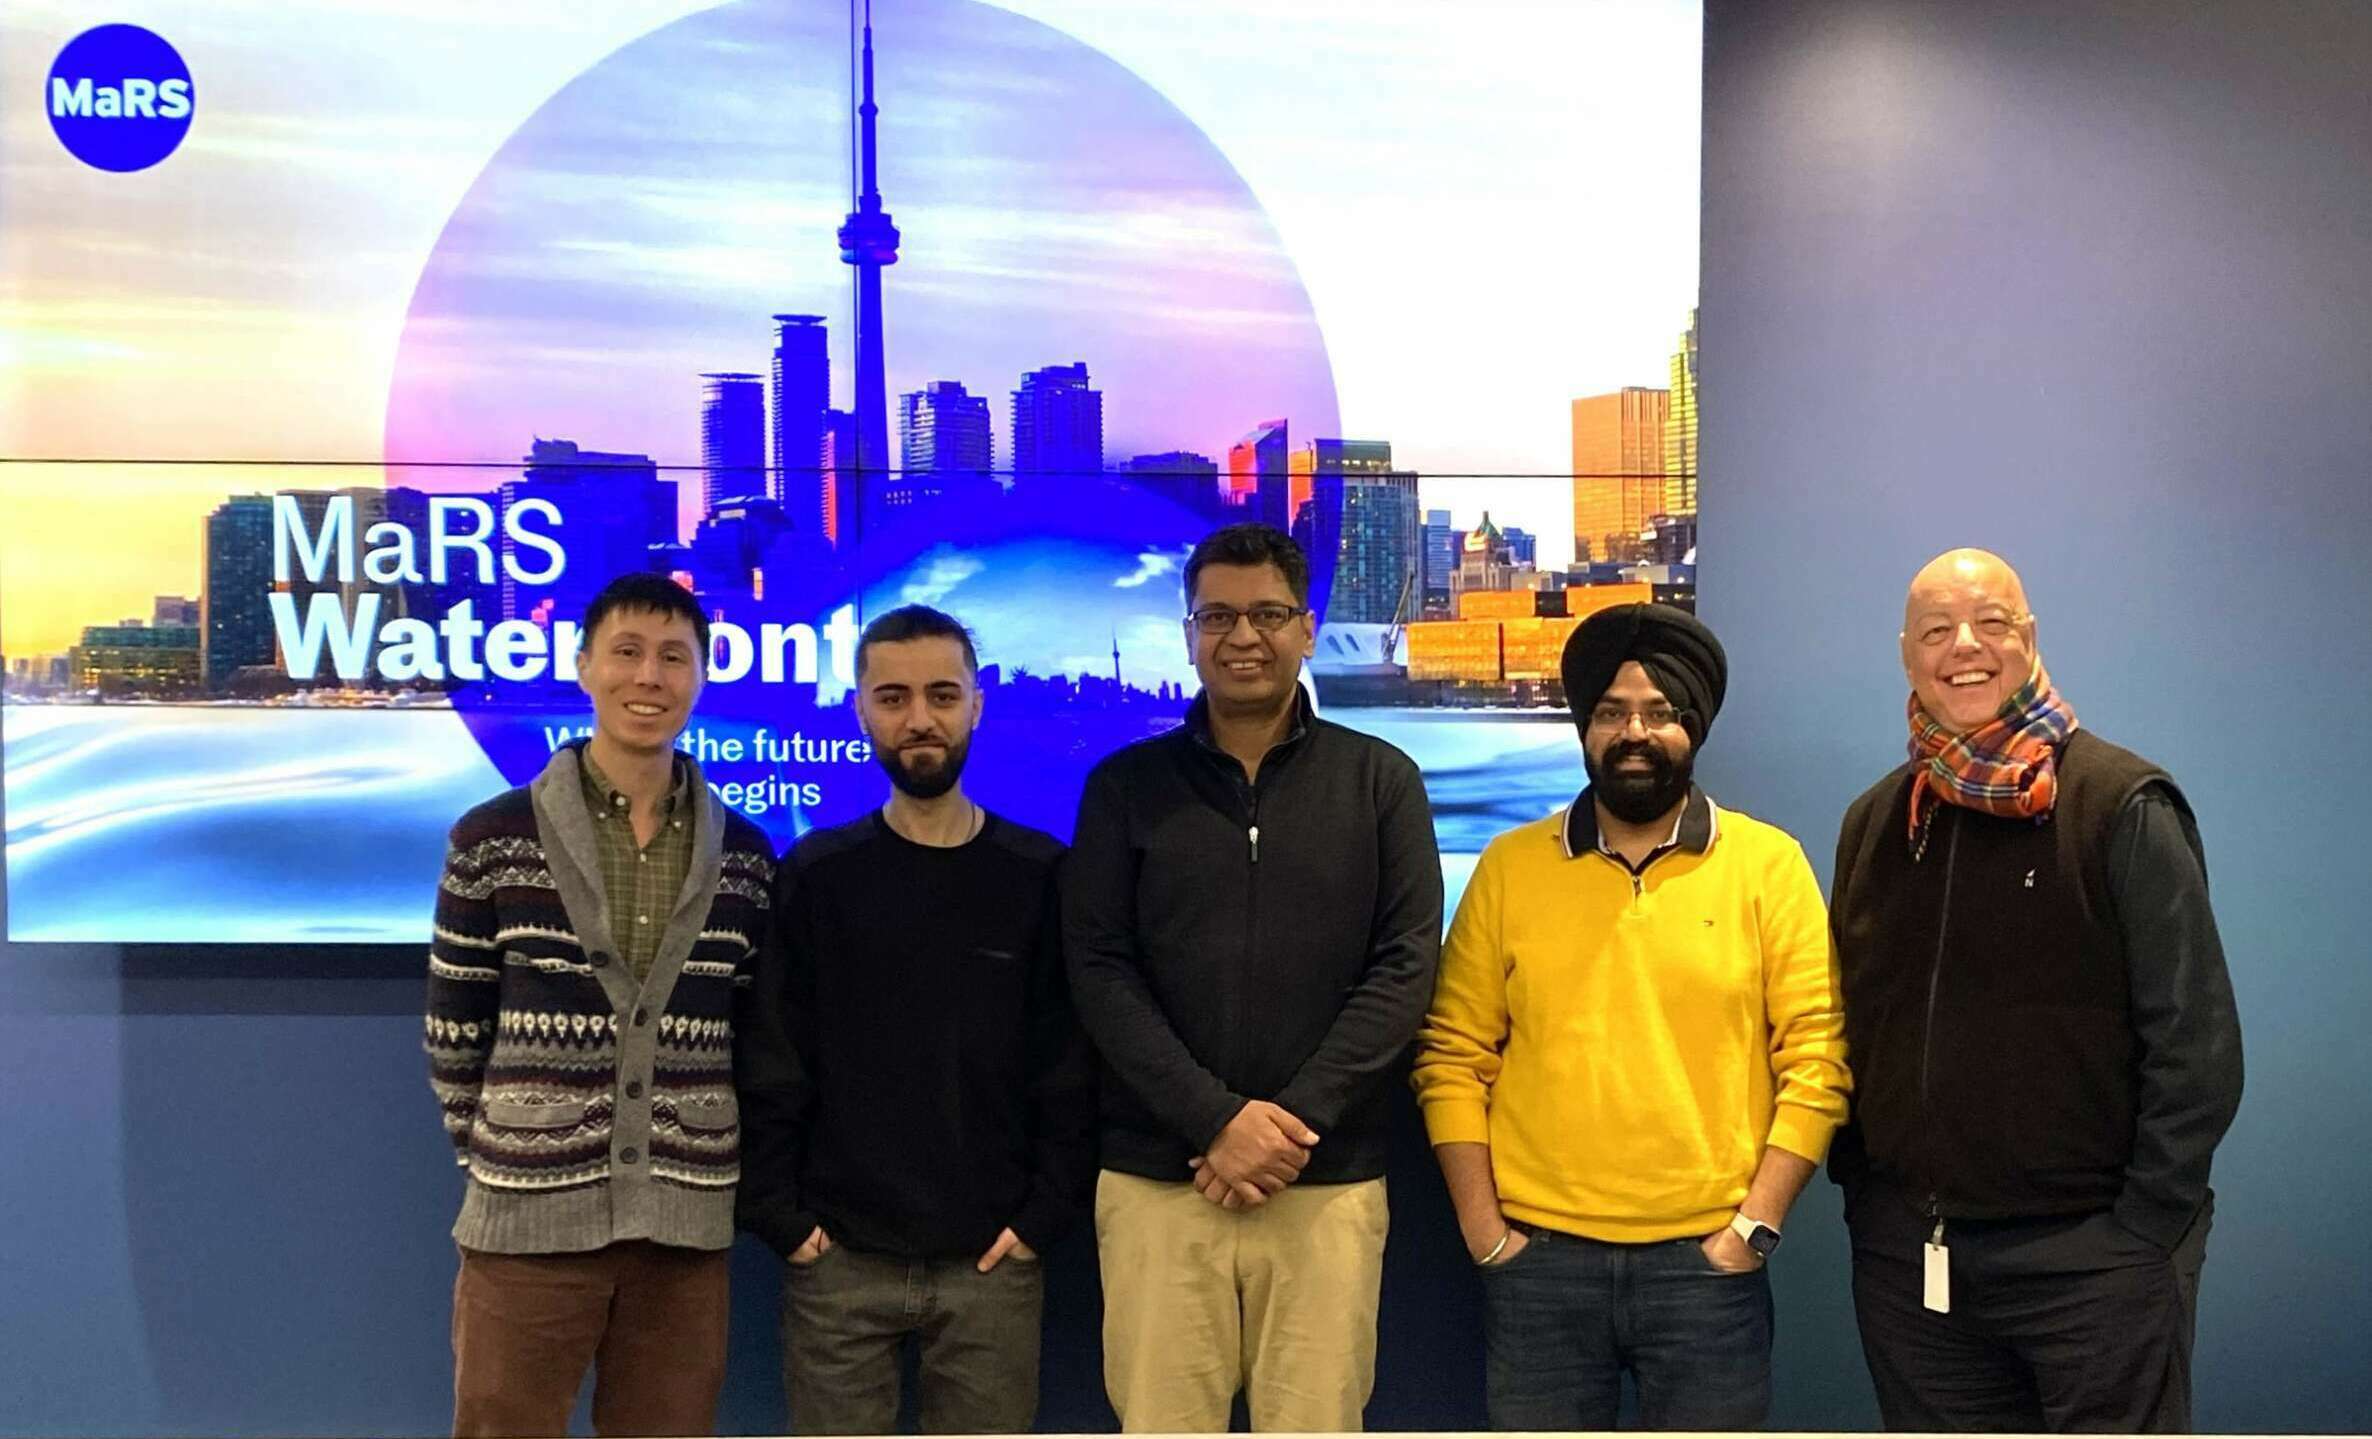 Toronto Global team smiling with XLSCOUT team at the MaRS Waterfront Innovation Centre.